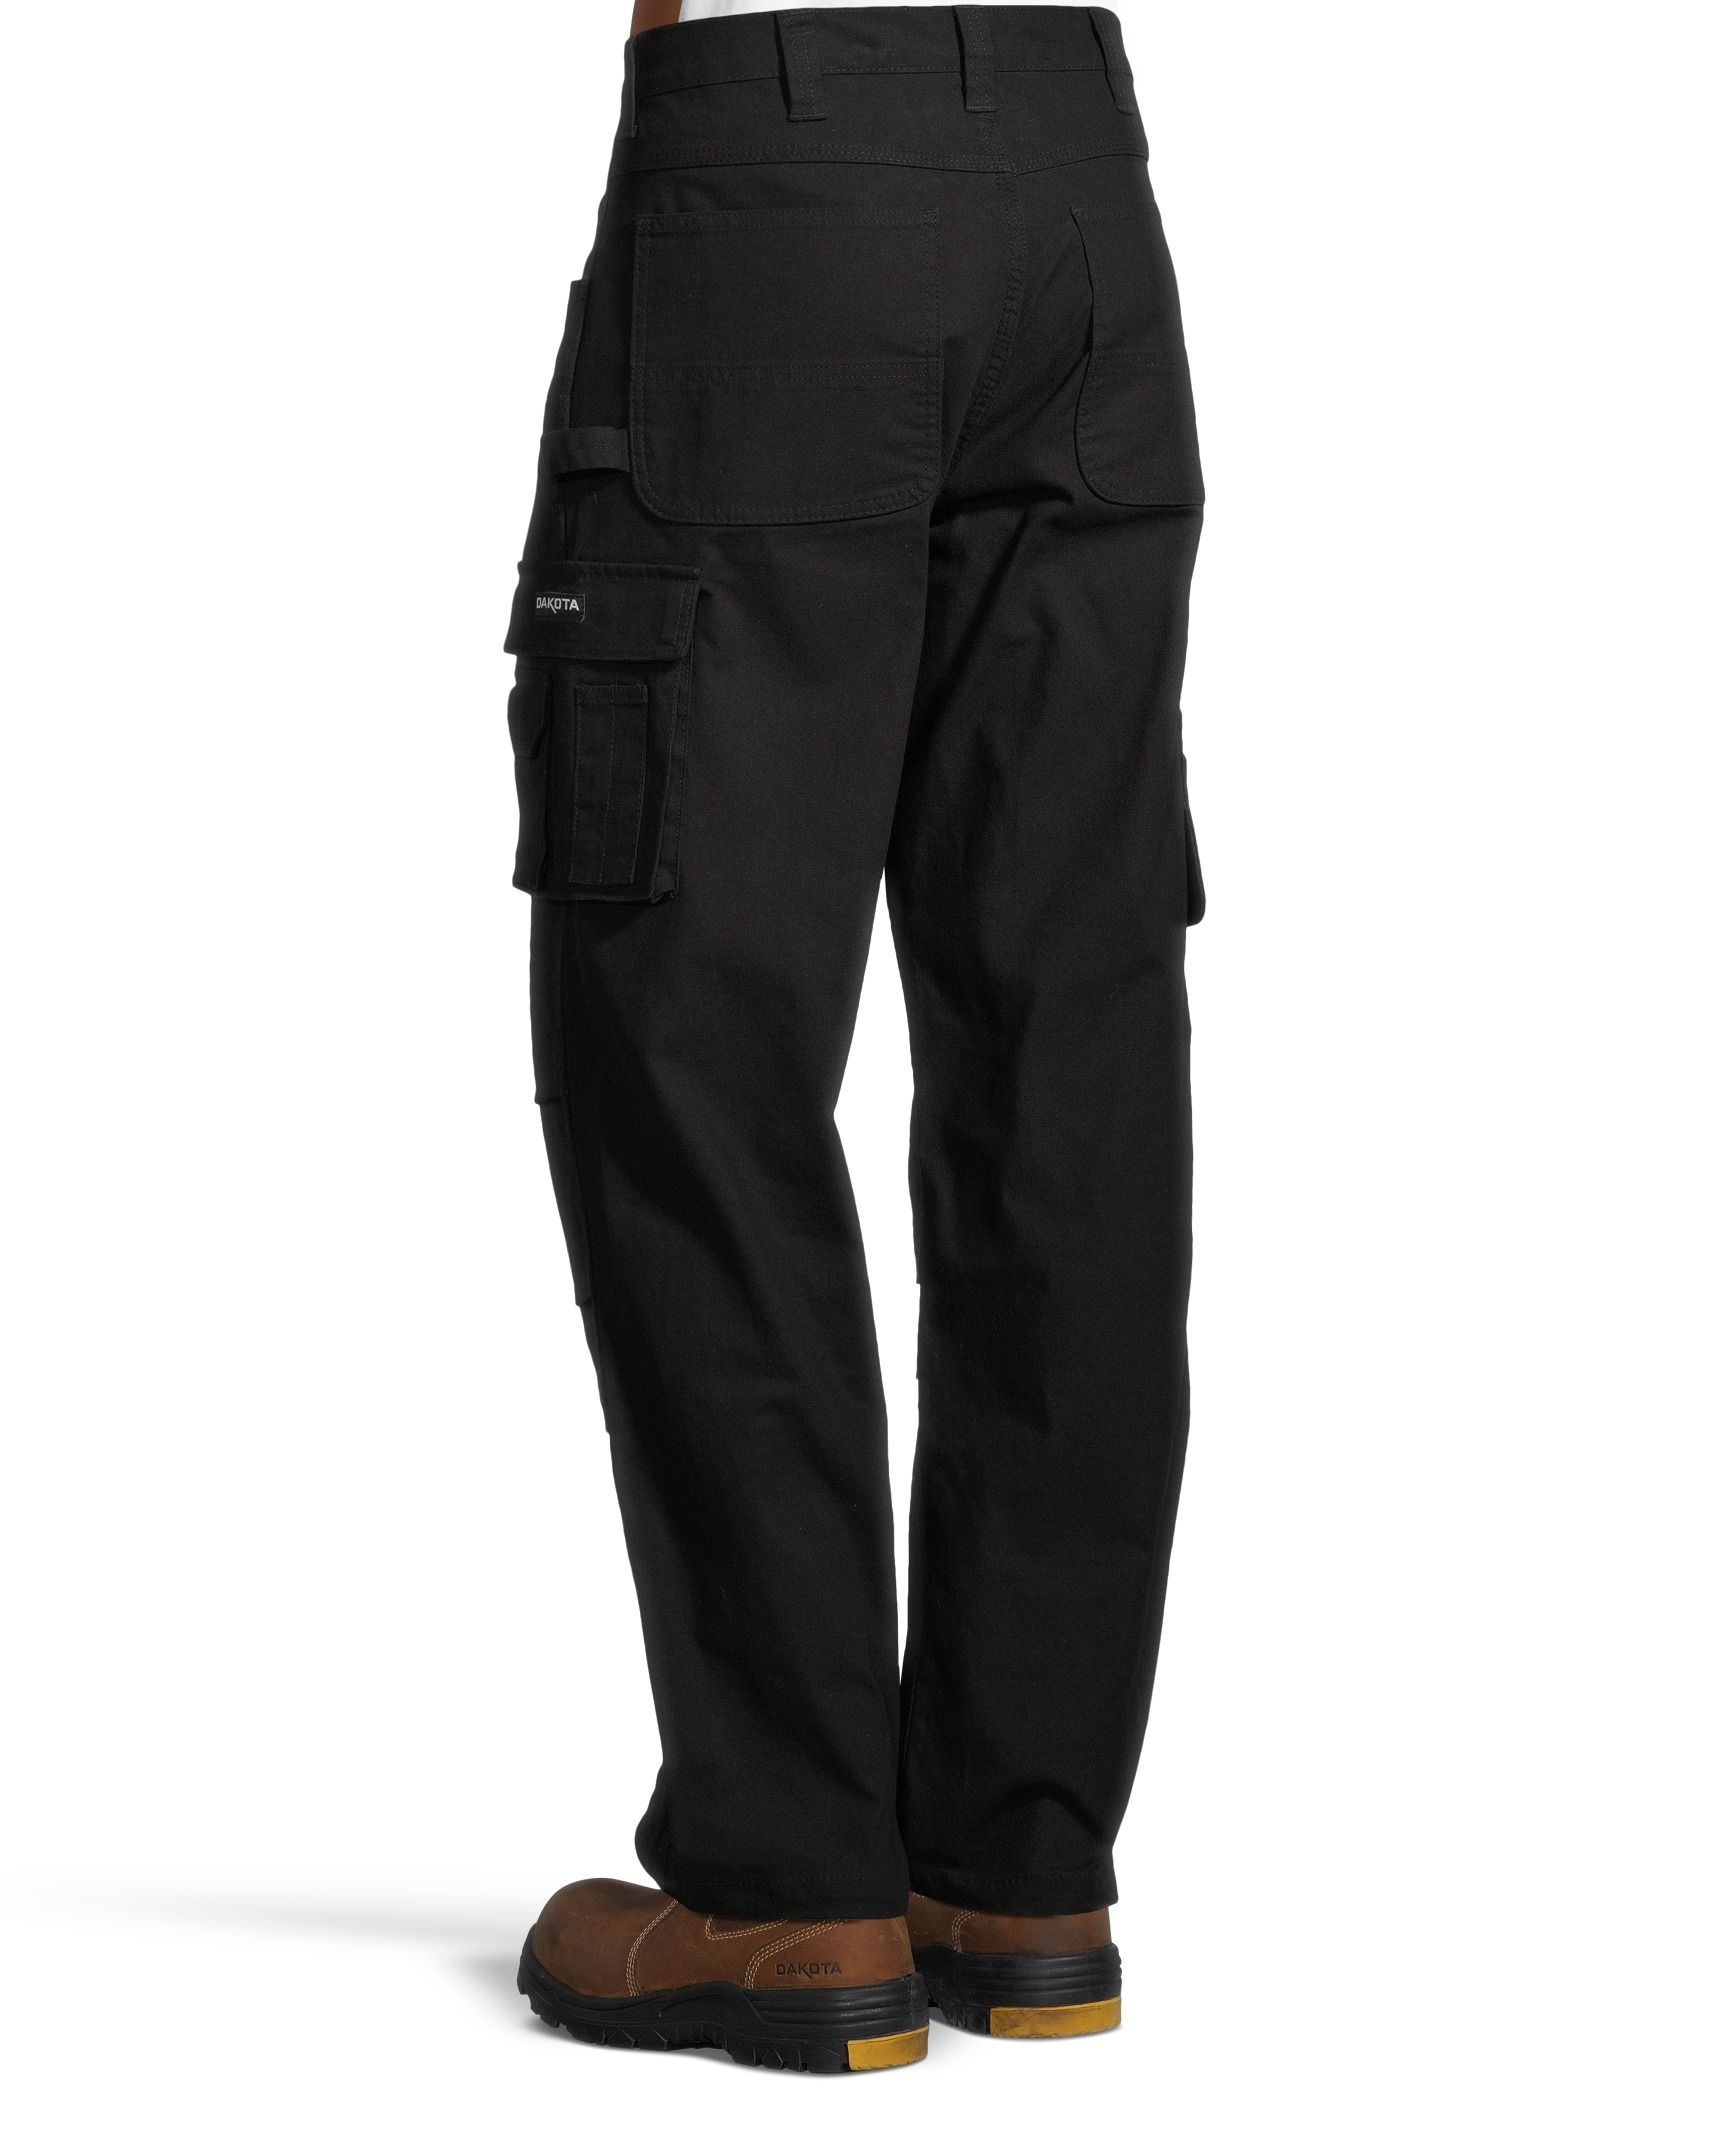 When in Doubt, Choose Cargo Work Pants for Your Construction Job - IronPros